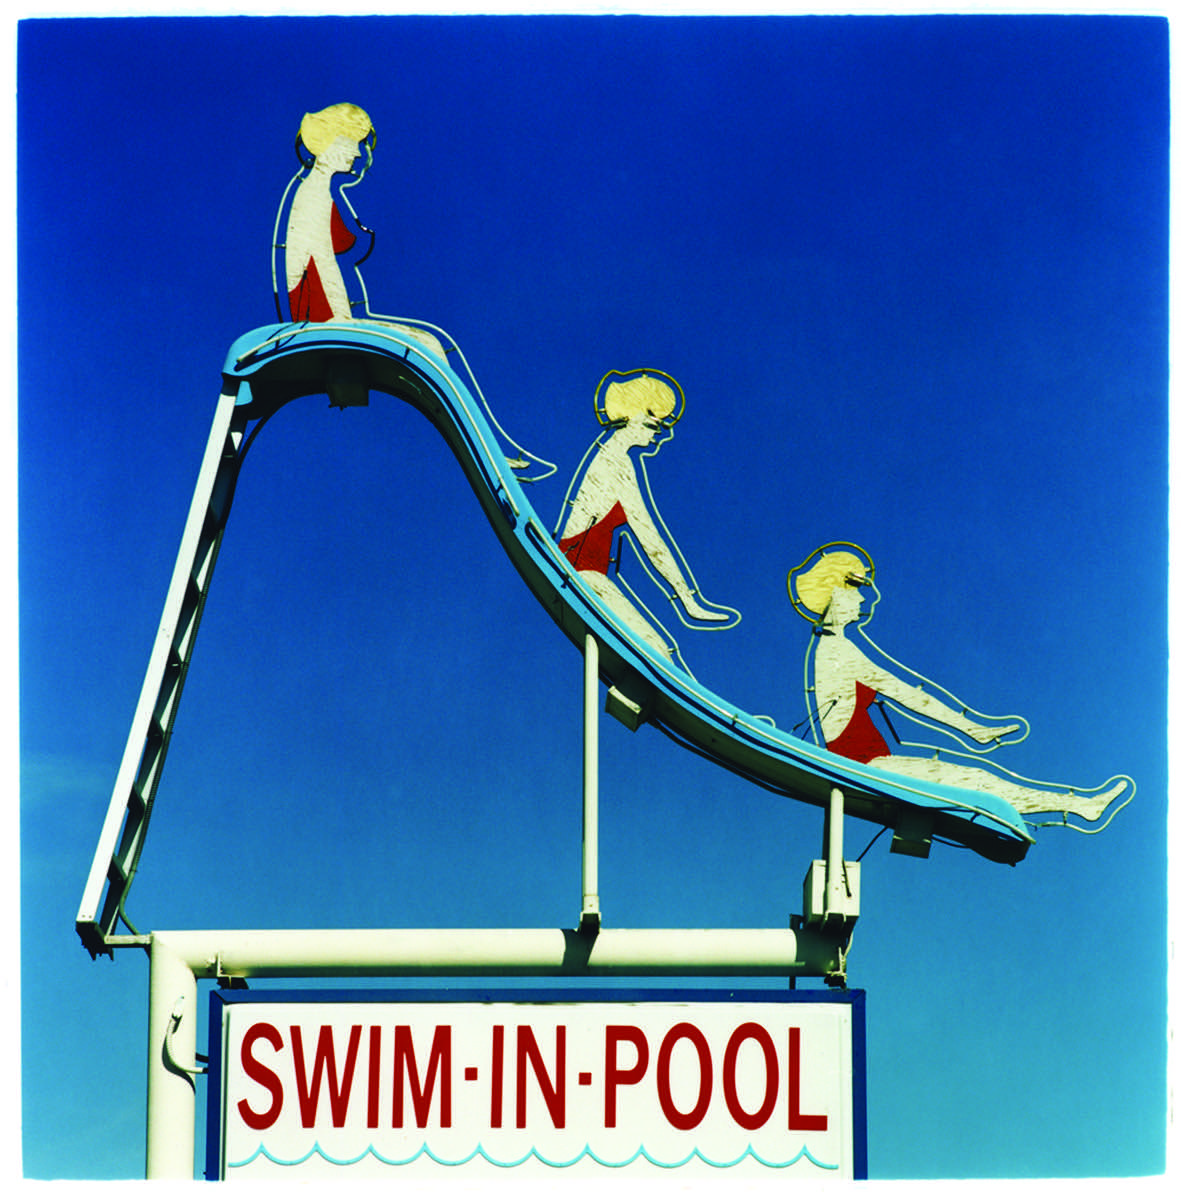 Richard Heeps, Swim In Pool, The Auction Collective